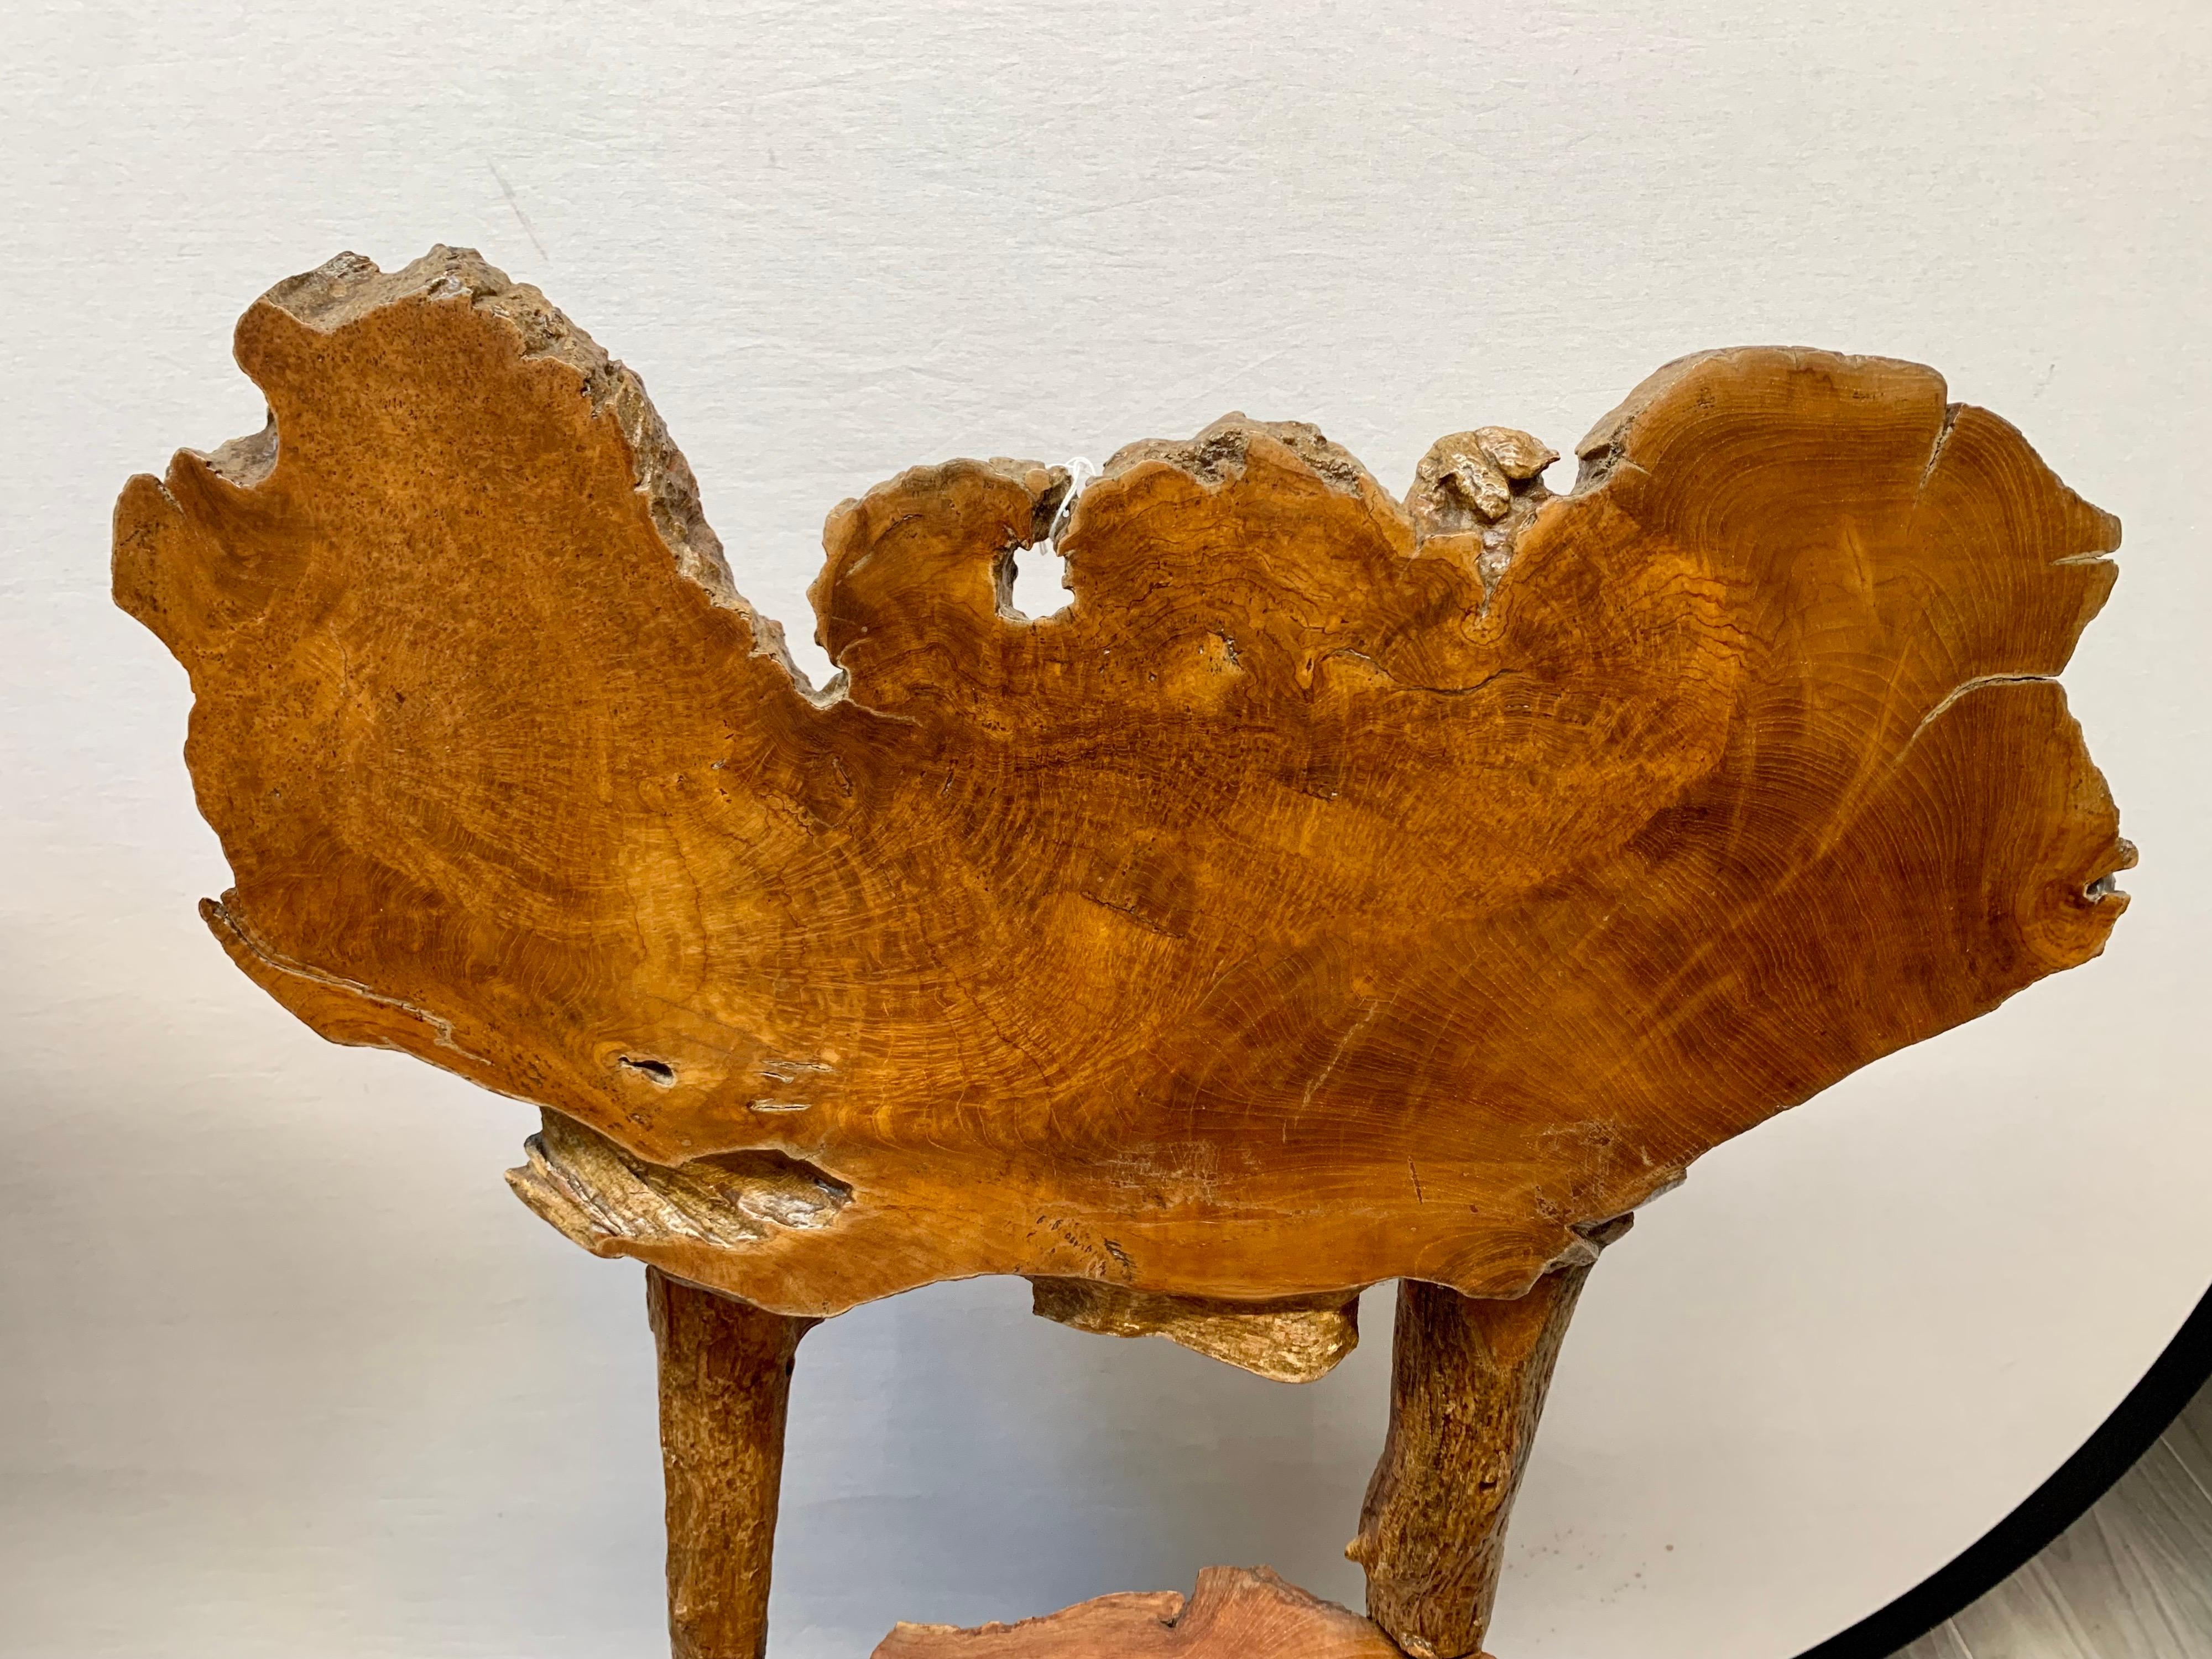 No two of these handmade organic live edge chairs are exactly alike. Coveted and possessing great lines and presence. Price is for the set. Now, more than ever, home is where the heart is.